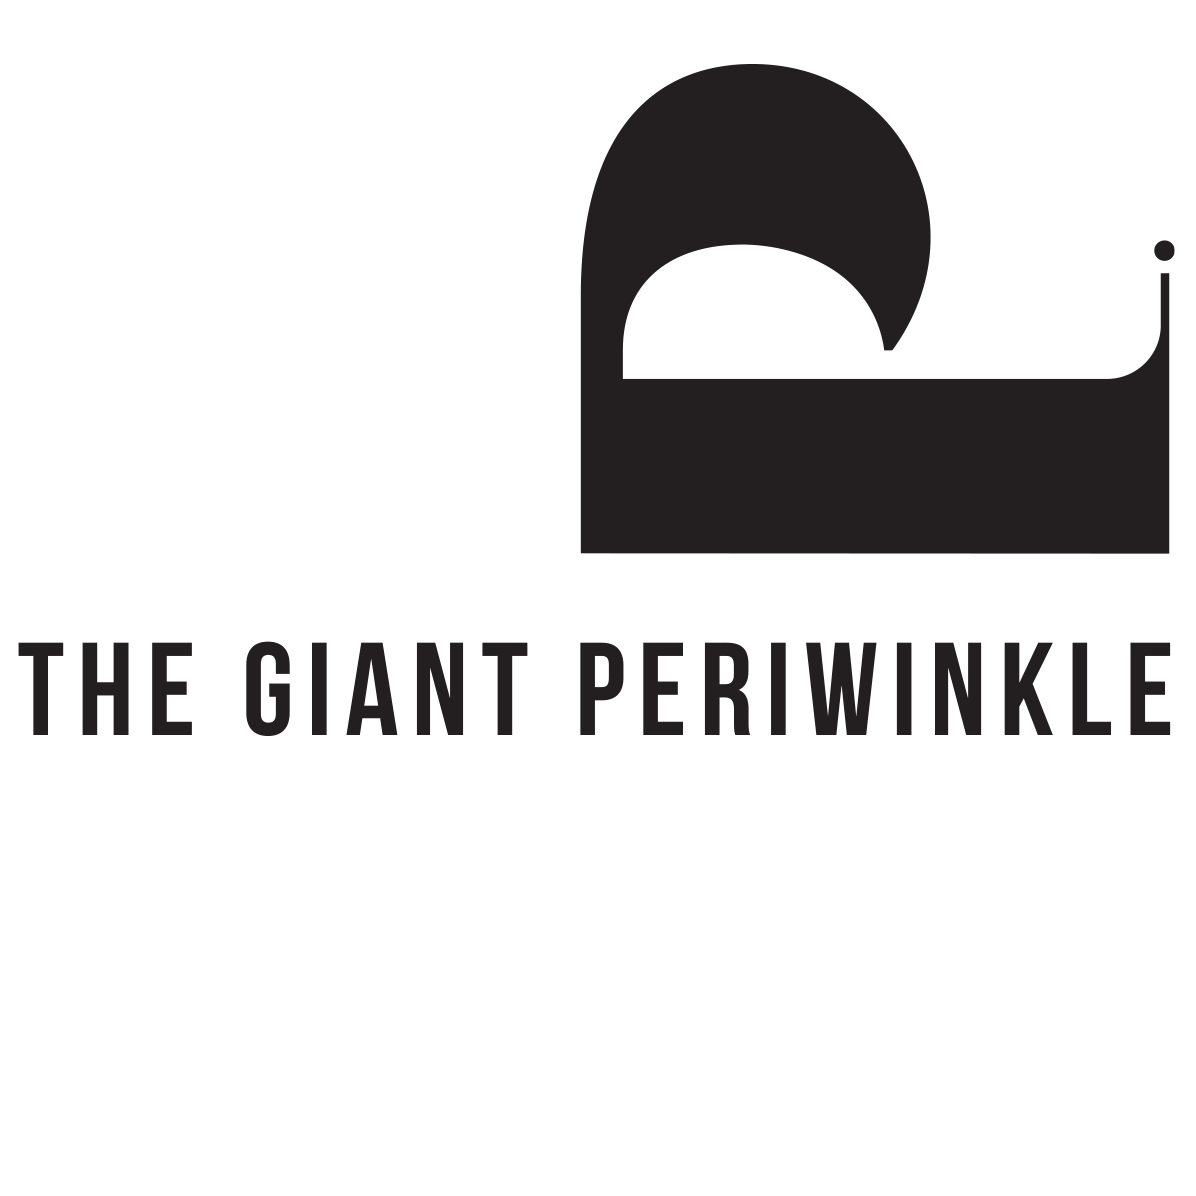 The Giant Periwinkle